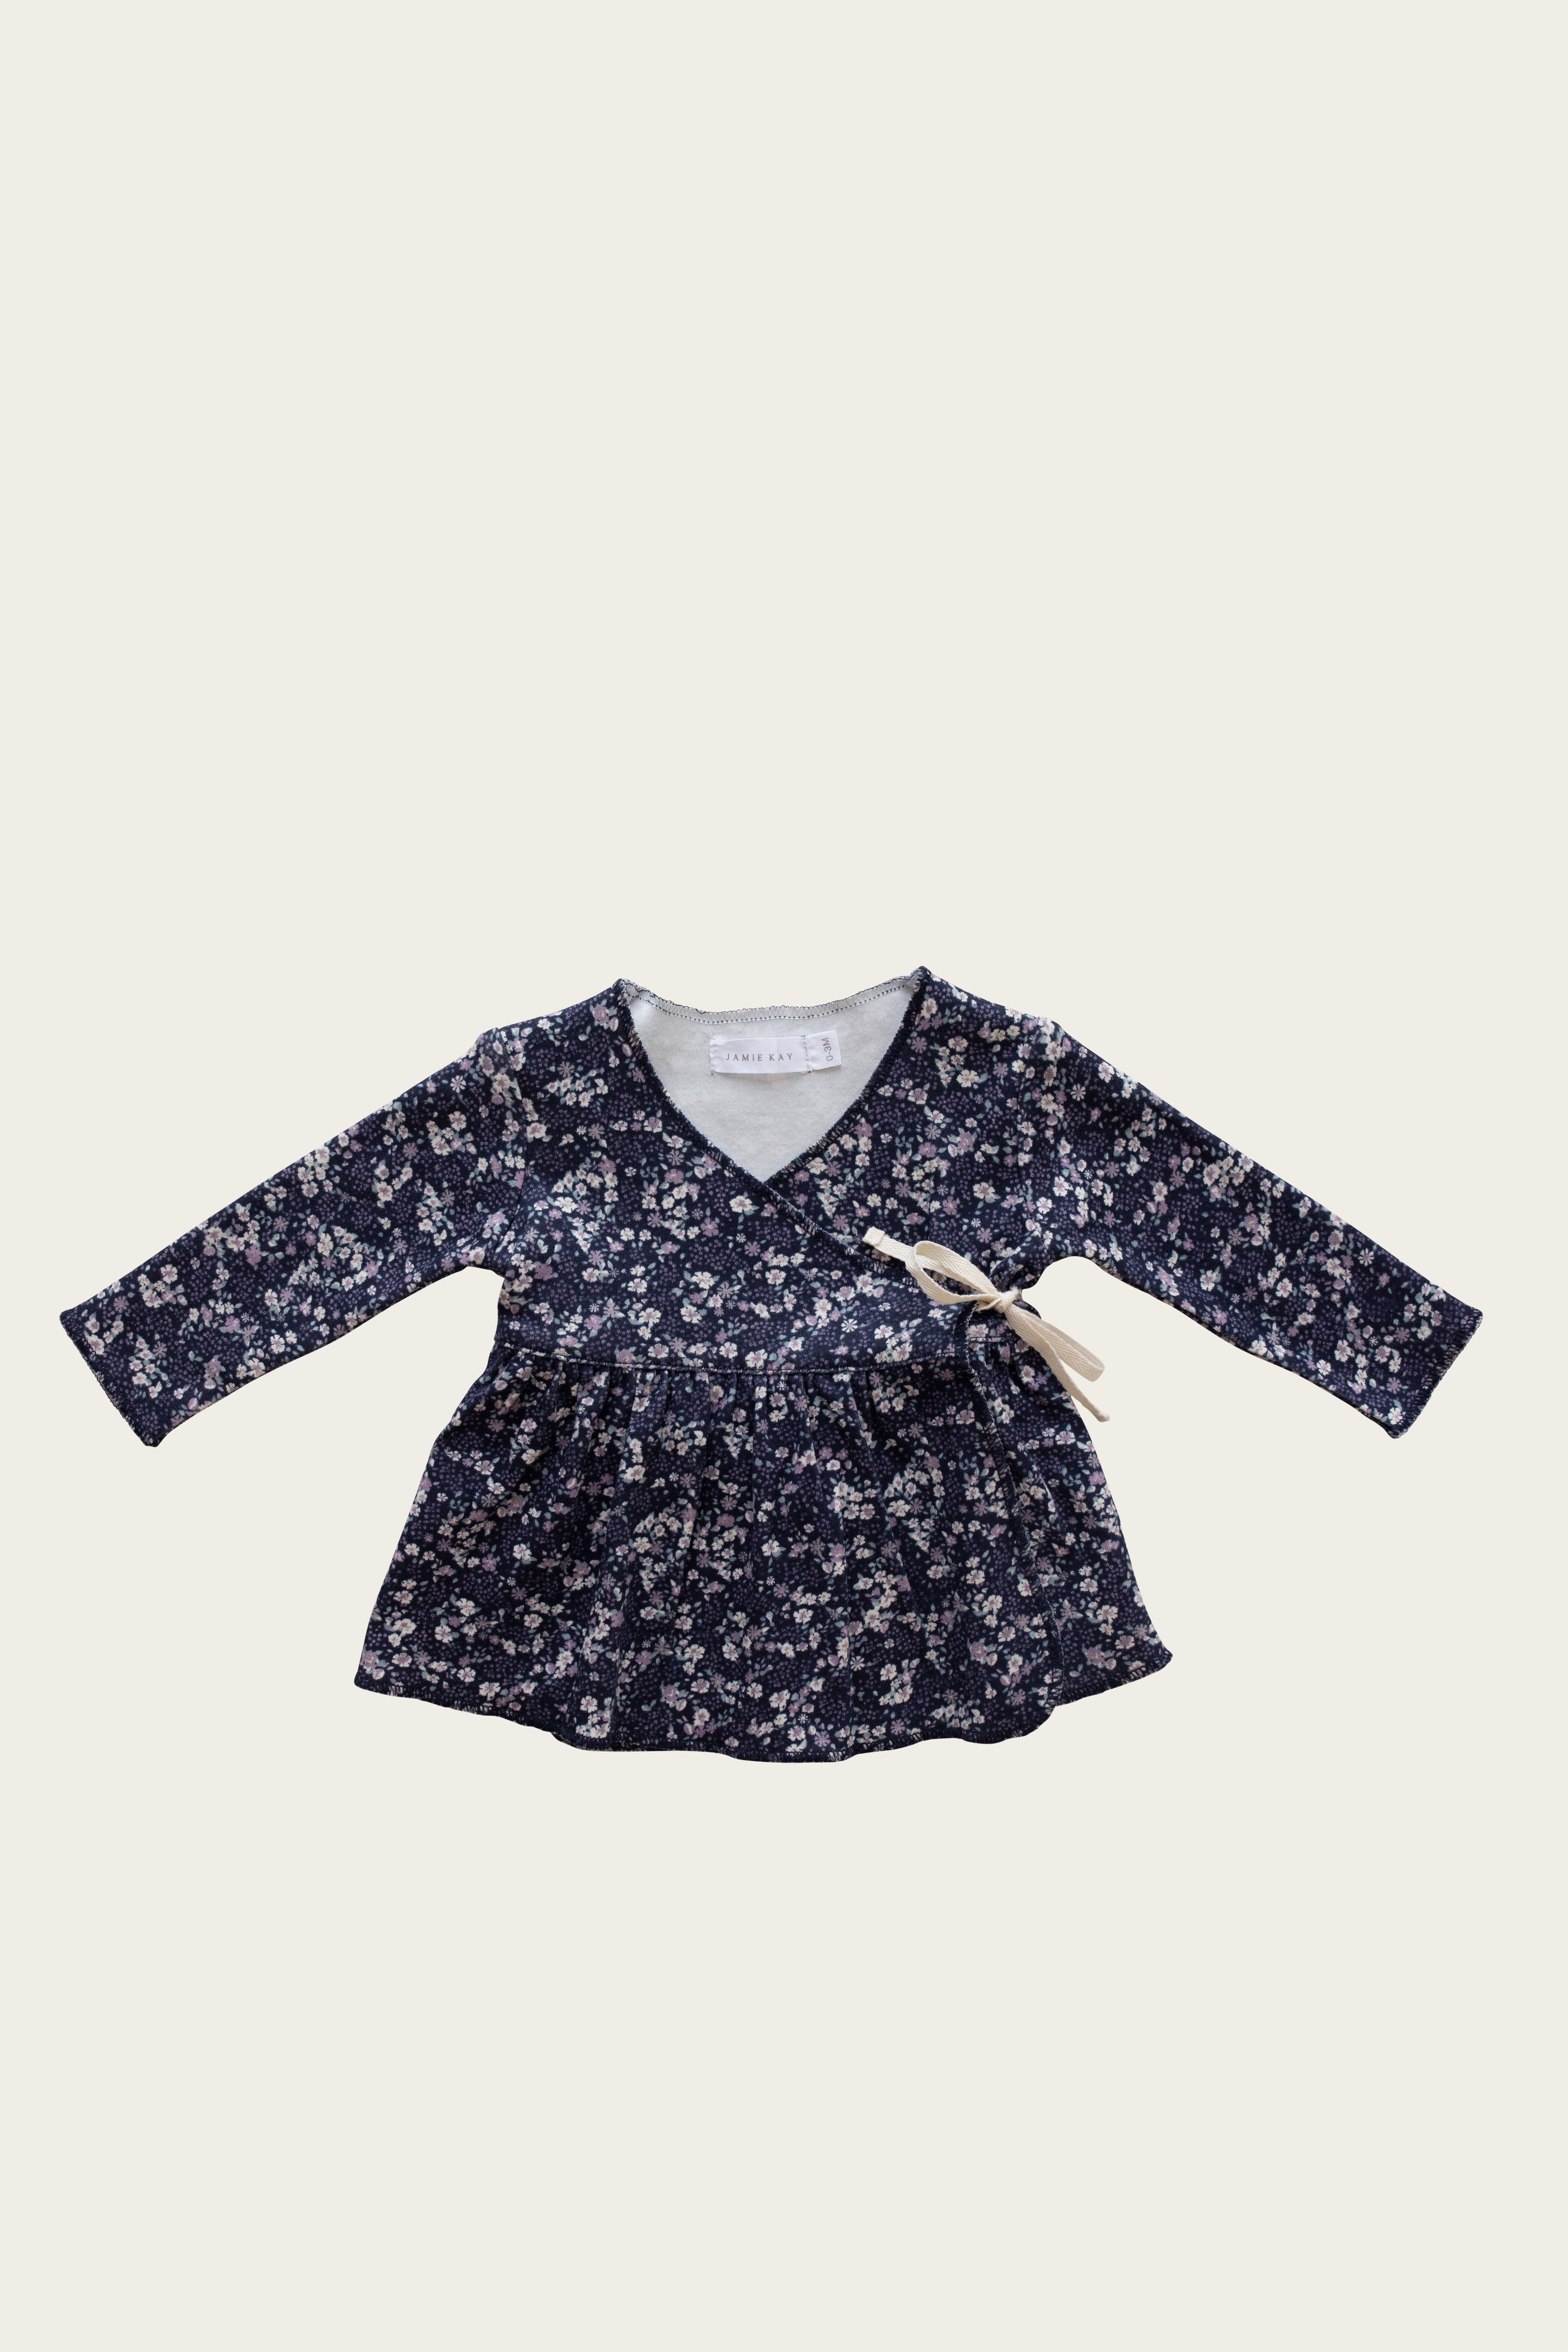 Organic Floral Boutique Blueberry Wrap Jamie | Barn | Top Kay Cotton Chic